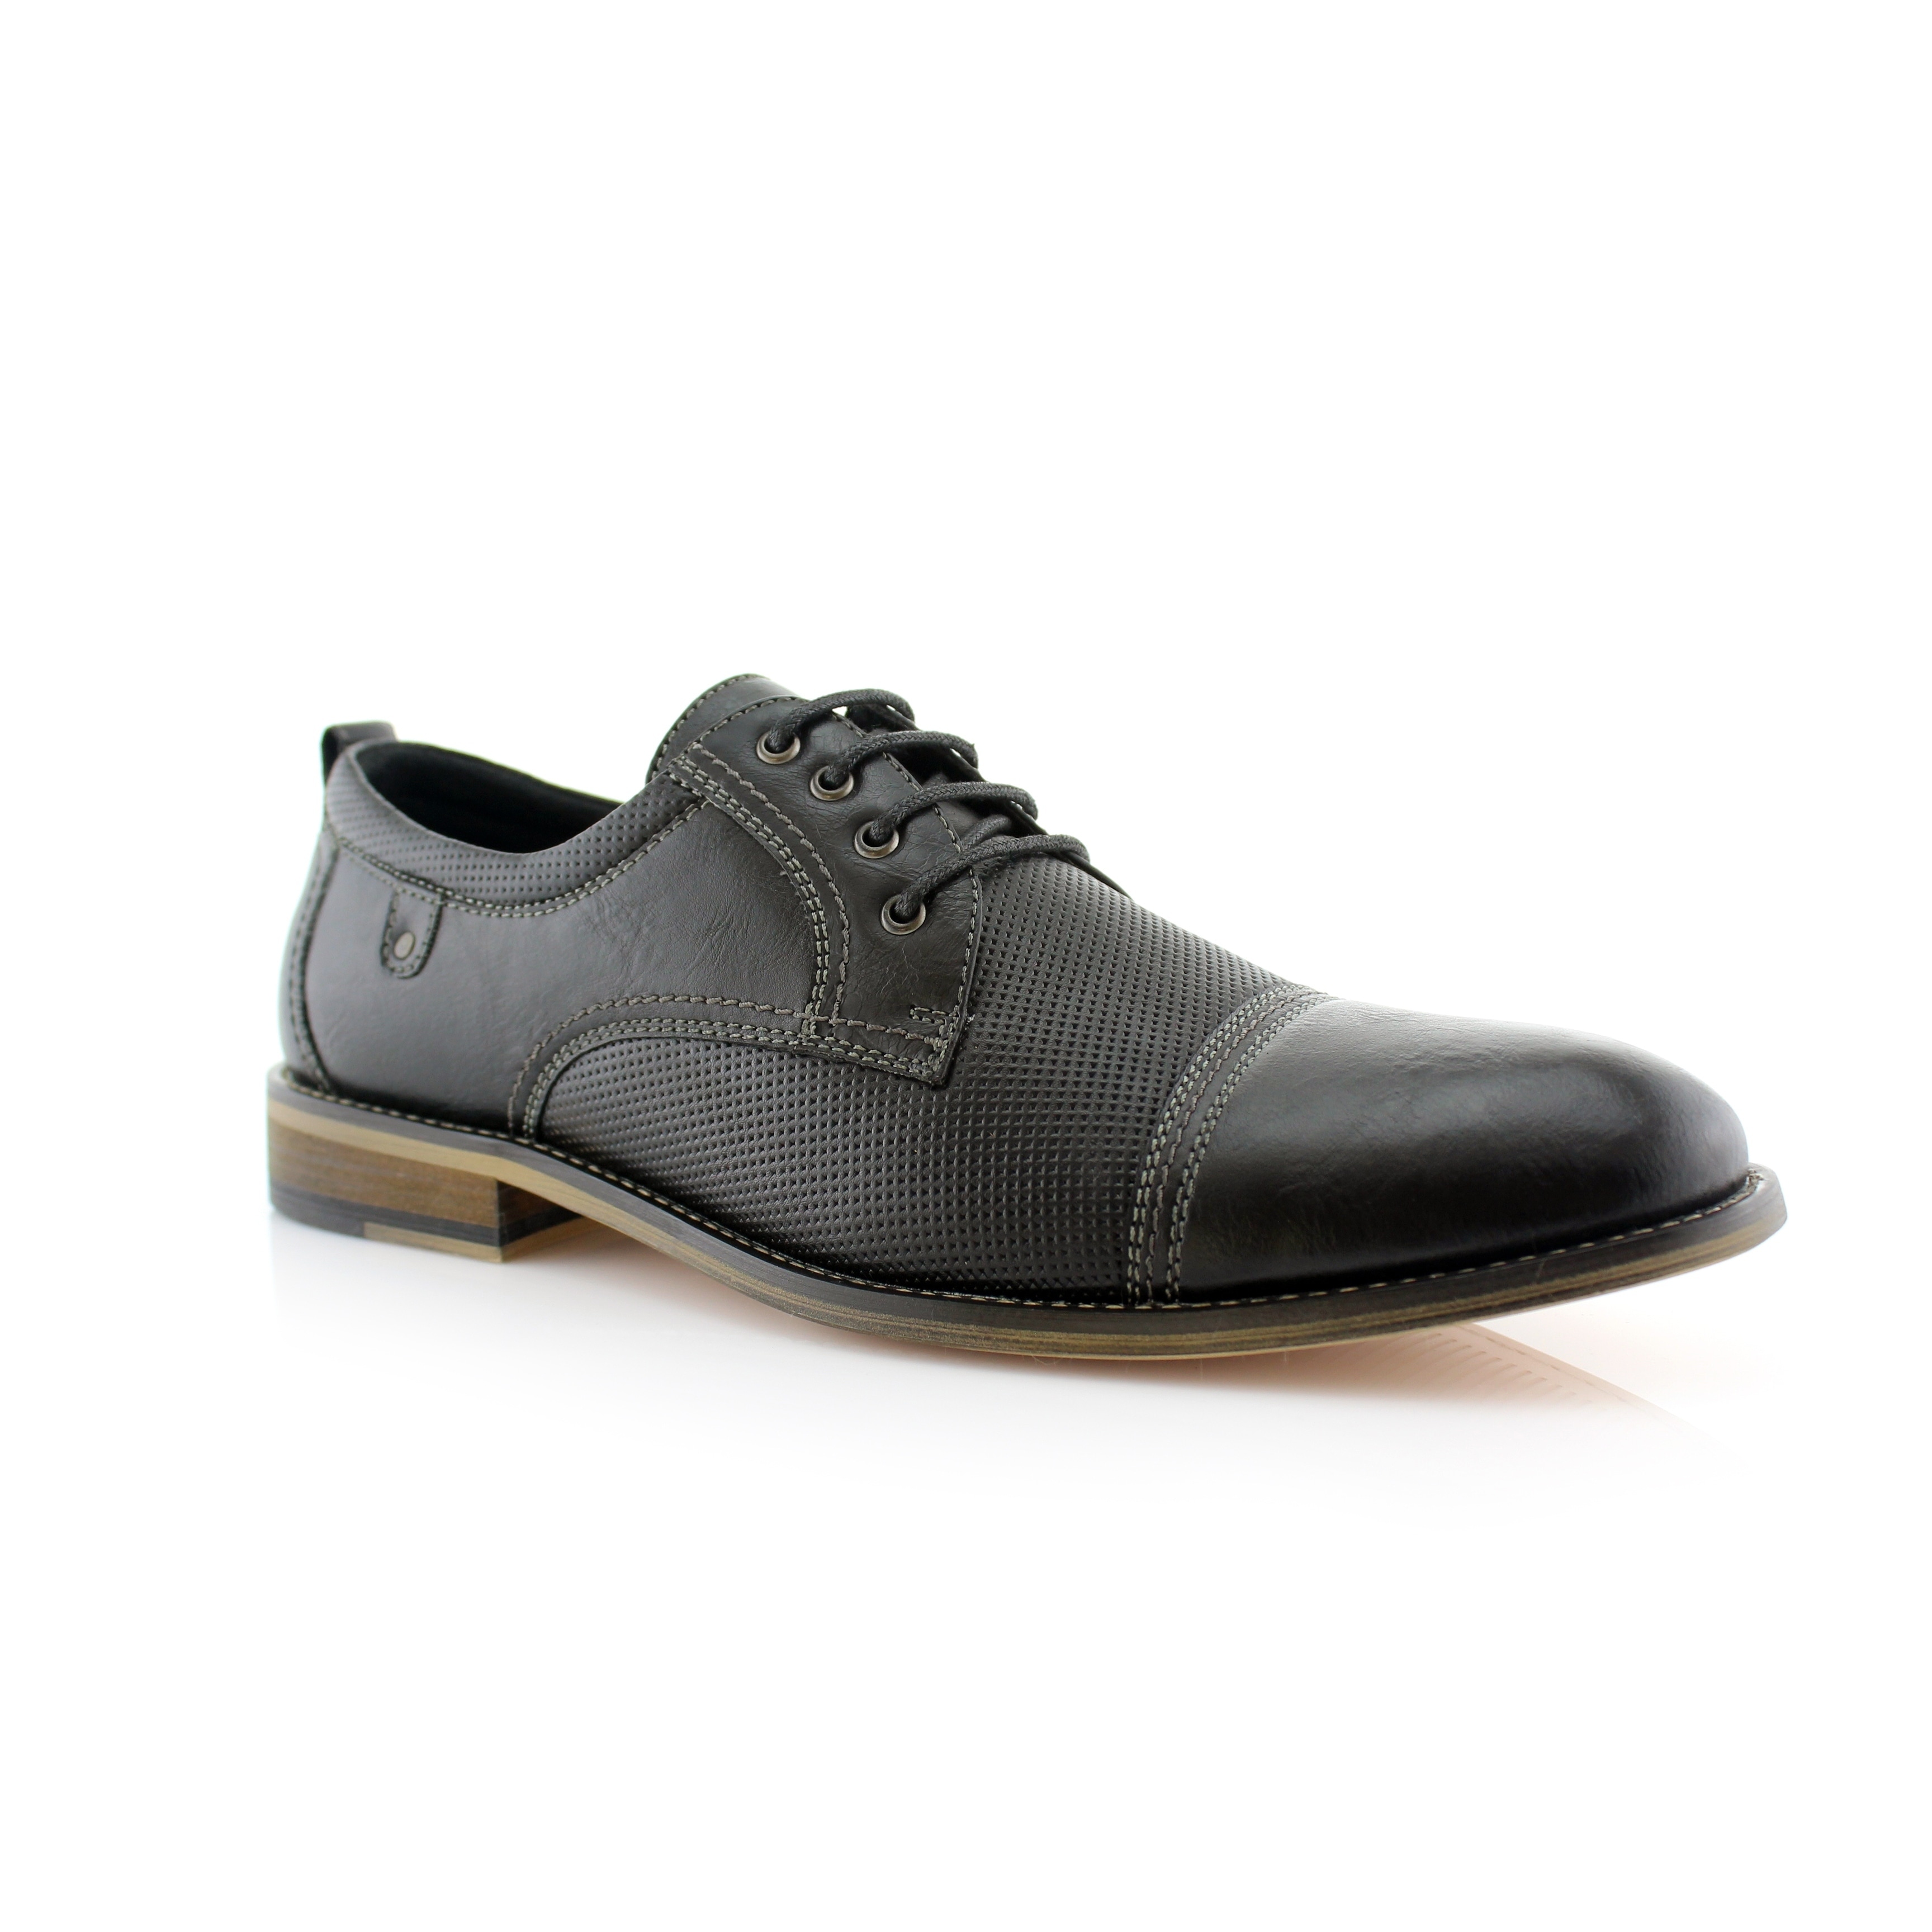 dress shoes with casual clothes